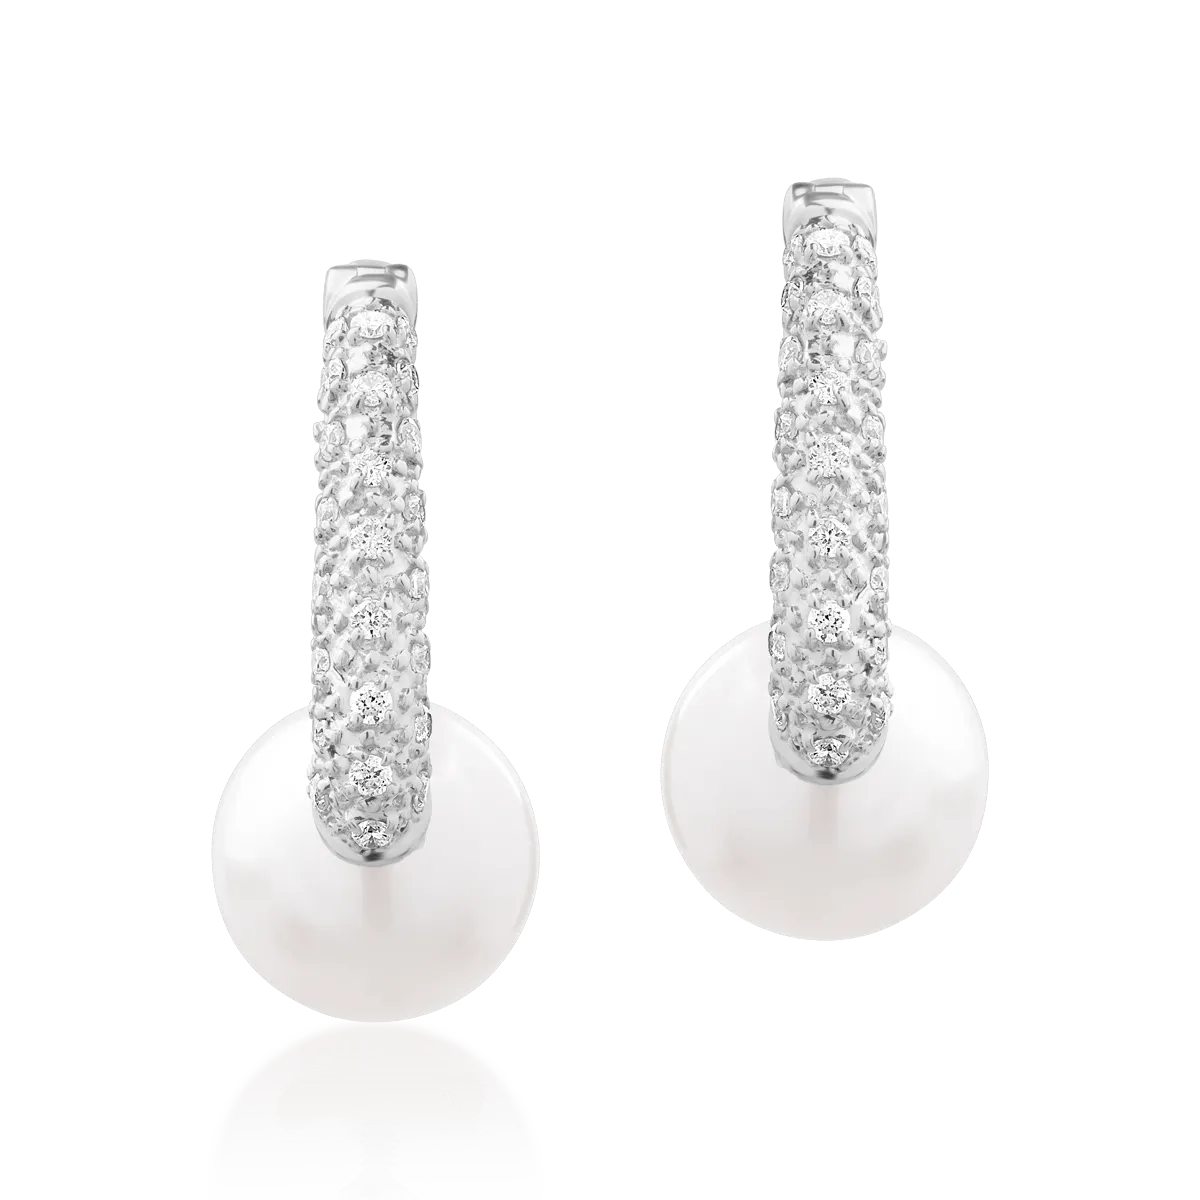 14K white gold earrings with 5.171ct fresh water cultured pearls and 0.17ct diamonds